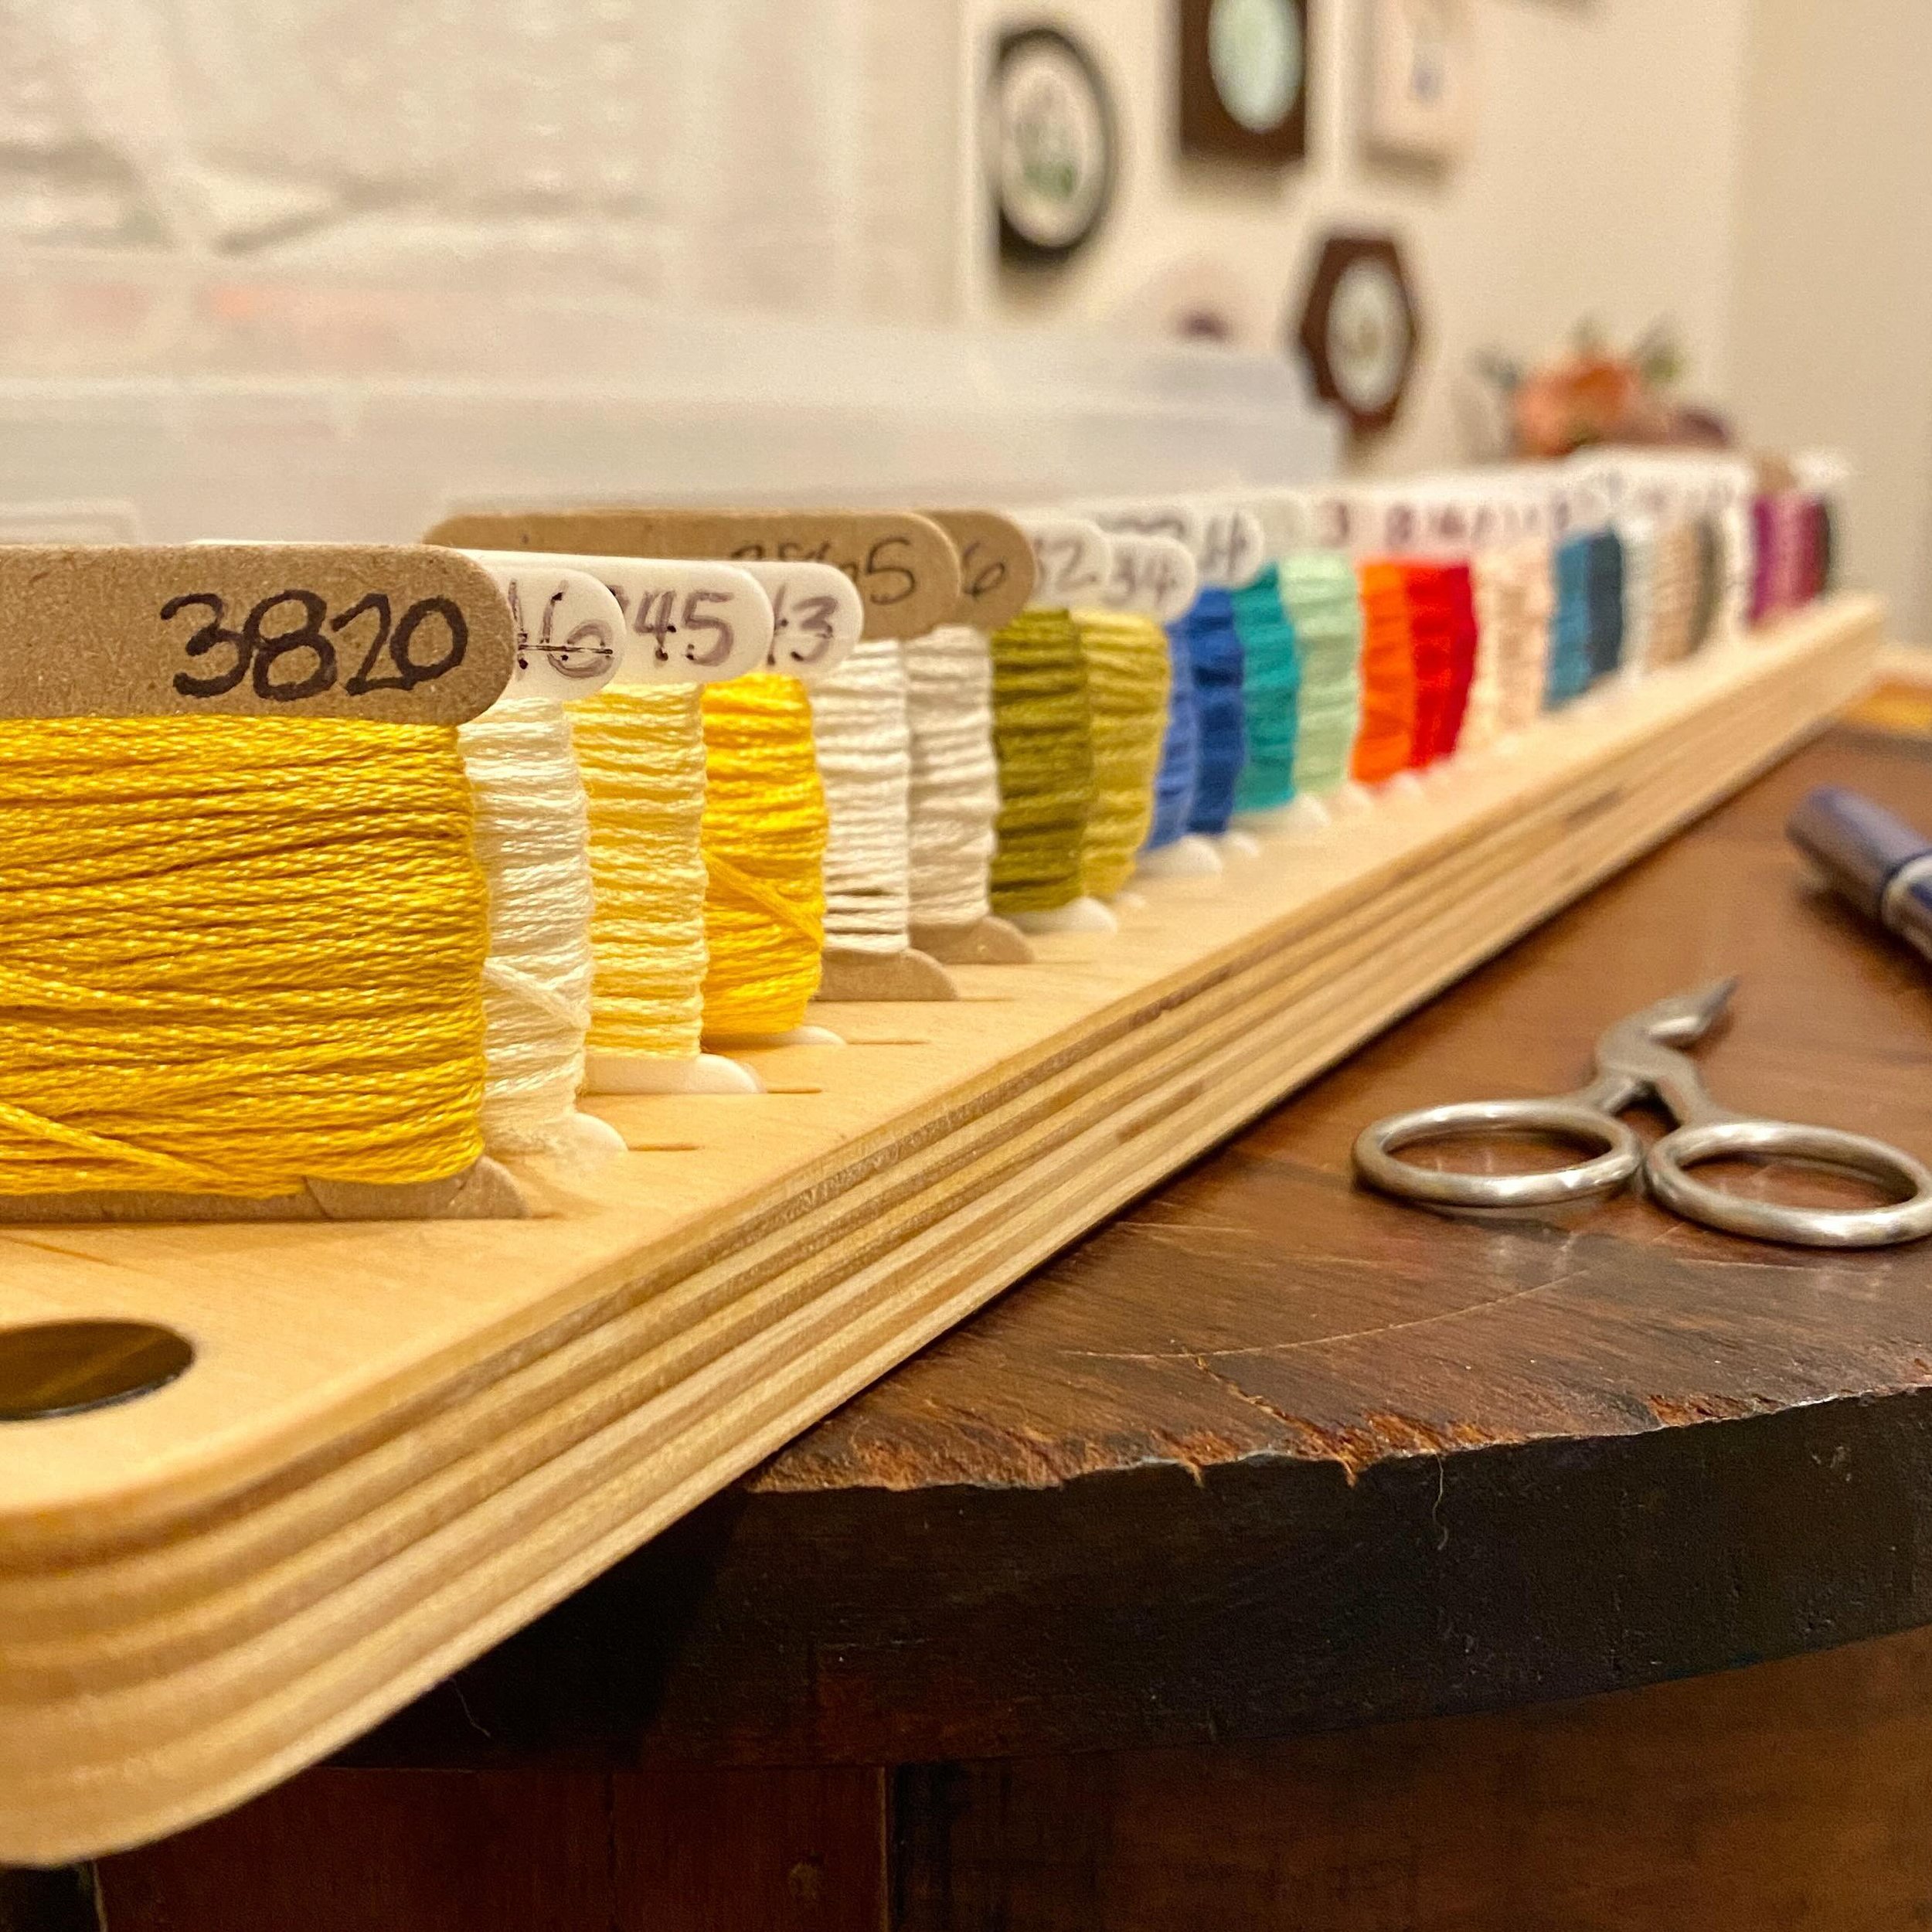 Now that&rsquo;s a lot of bobbins! 30, to be exact. 

I&rsquo;m bringing this along to @hhamericas in Chicago next week, where someone in the exhibit hall will get to take it home. 

What would you do with a mega-long bobbin rack? Do really big proje